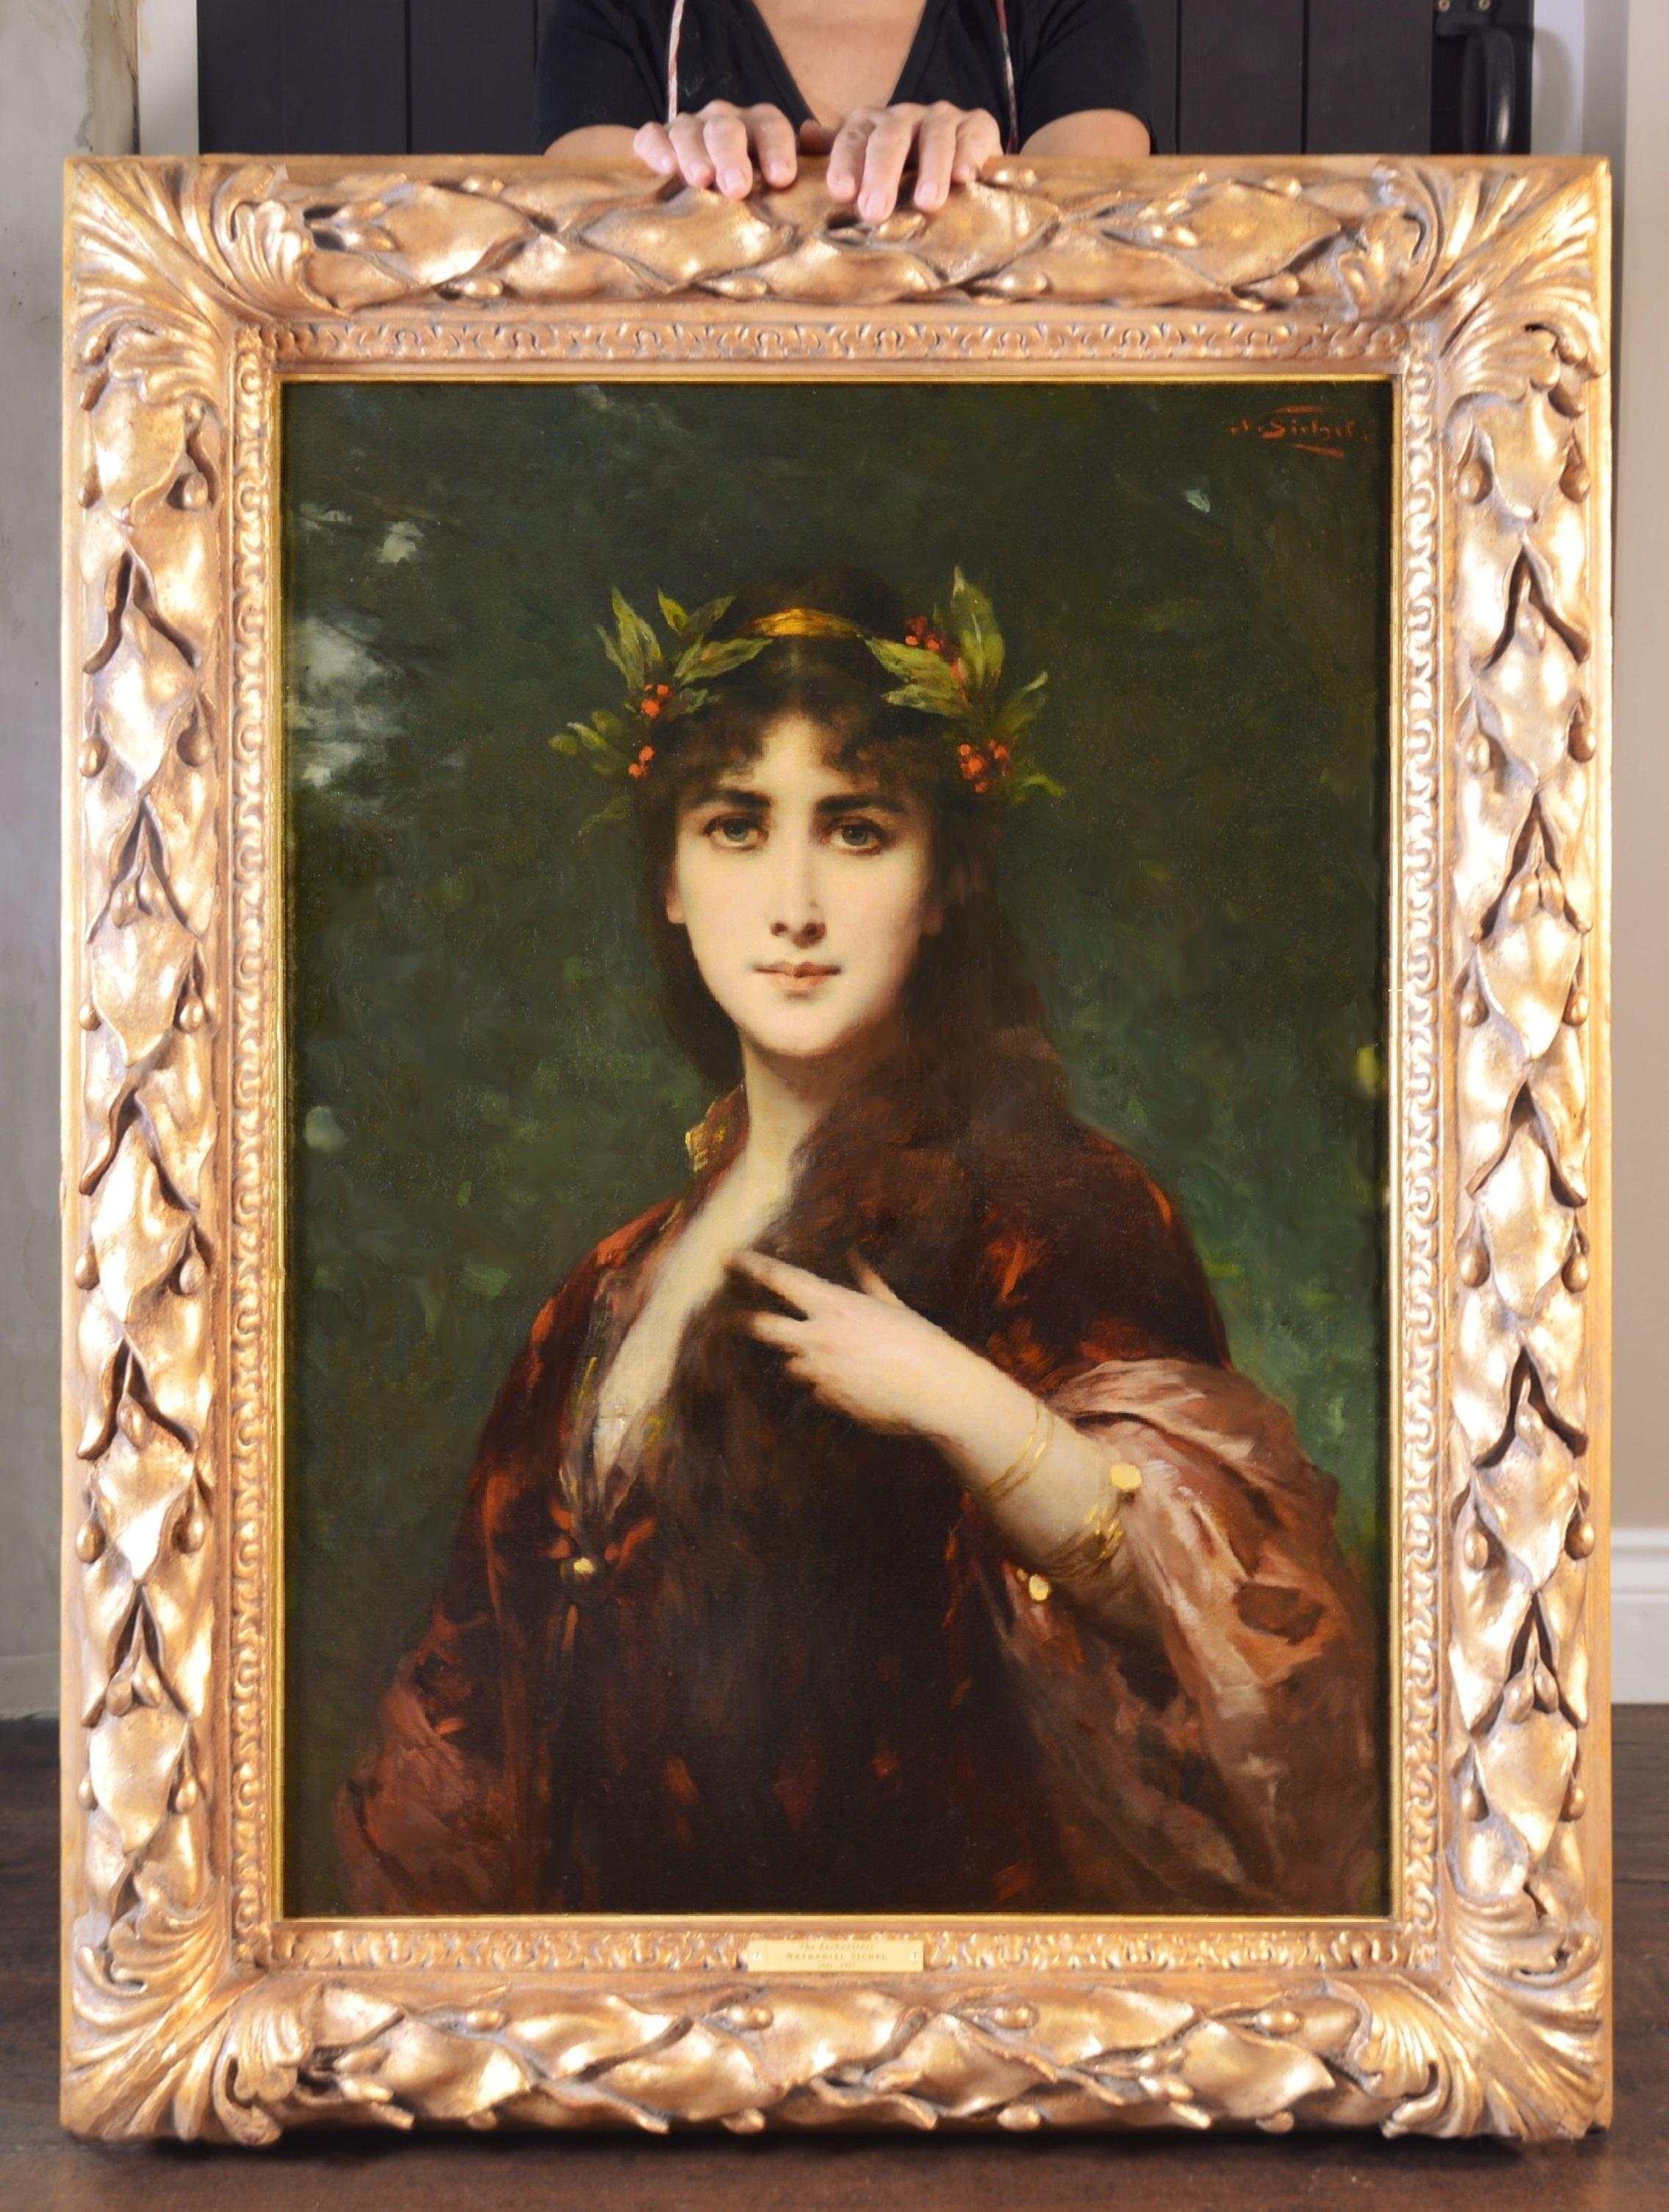 Who was one of the most important portrait painters of the 19th century?